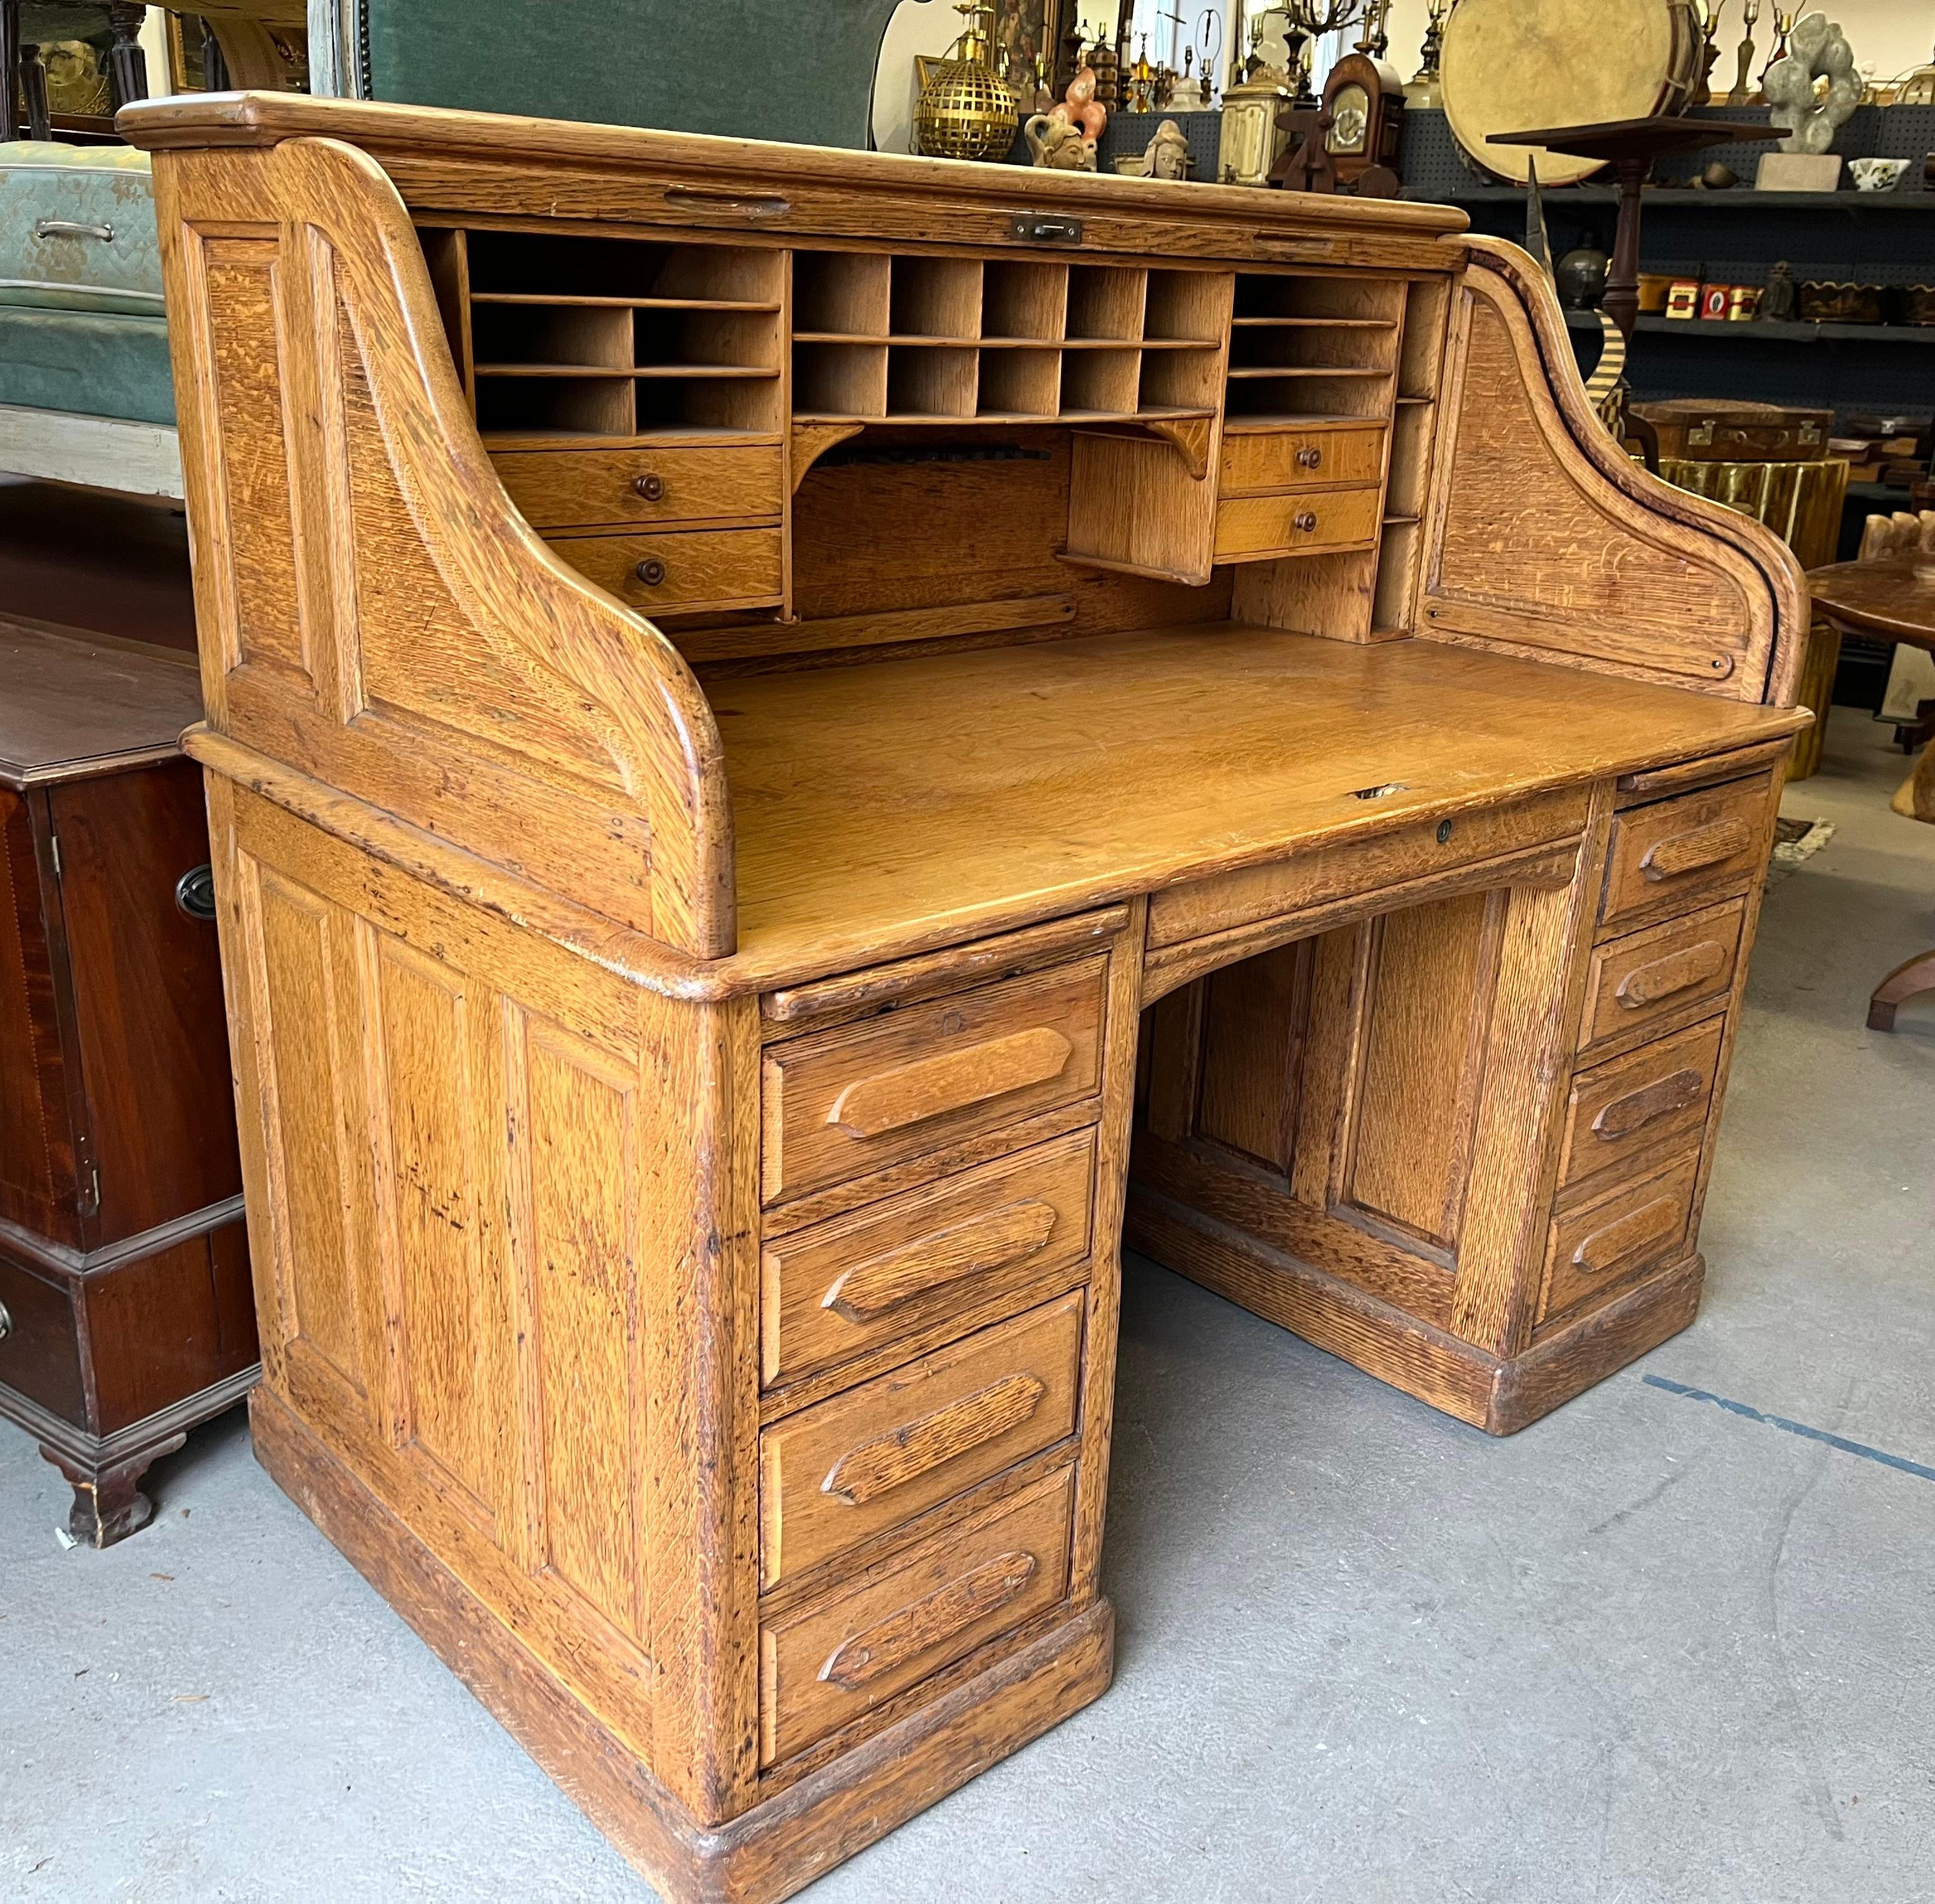 A nice “S-scroll” roll top desk in golden oak by Derby Co. of Boston, circa 1920, with double banks of drawers, interior compartments and paneled on all sides. Nice old finish in great working order. Tan or roll too works smoothly. Very clean. 